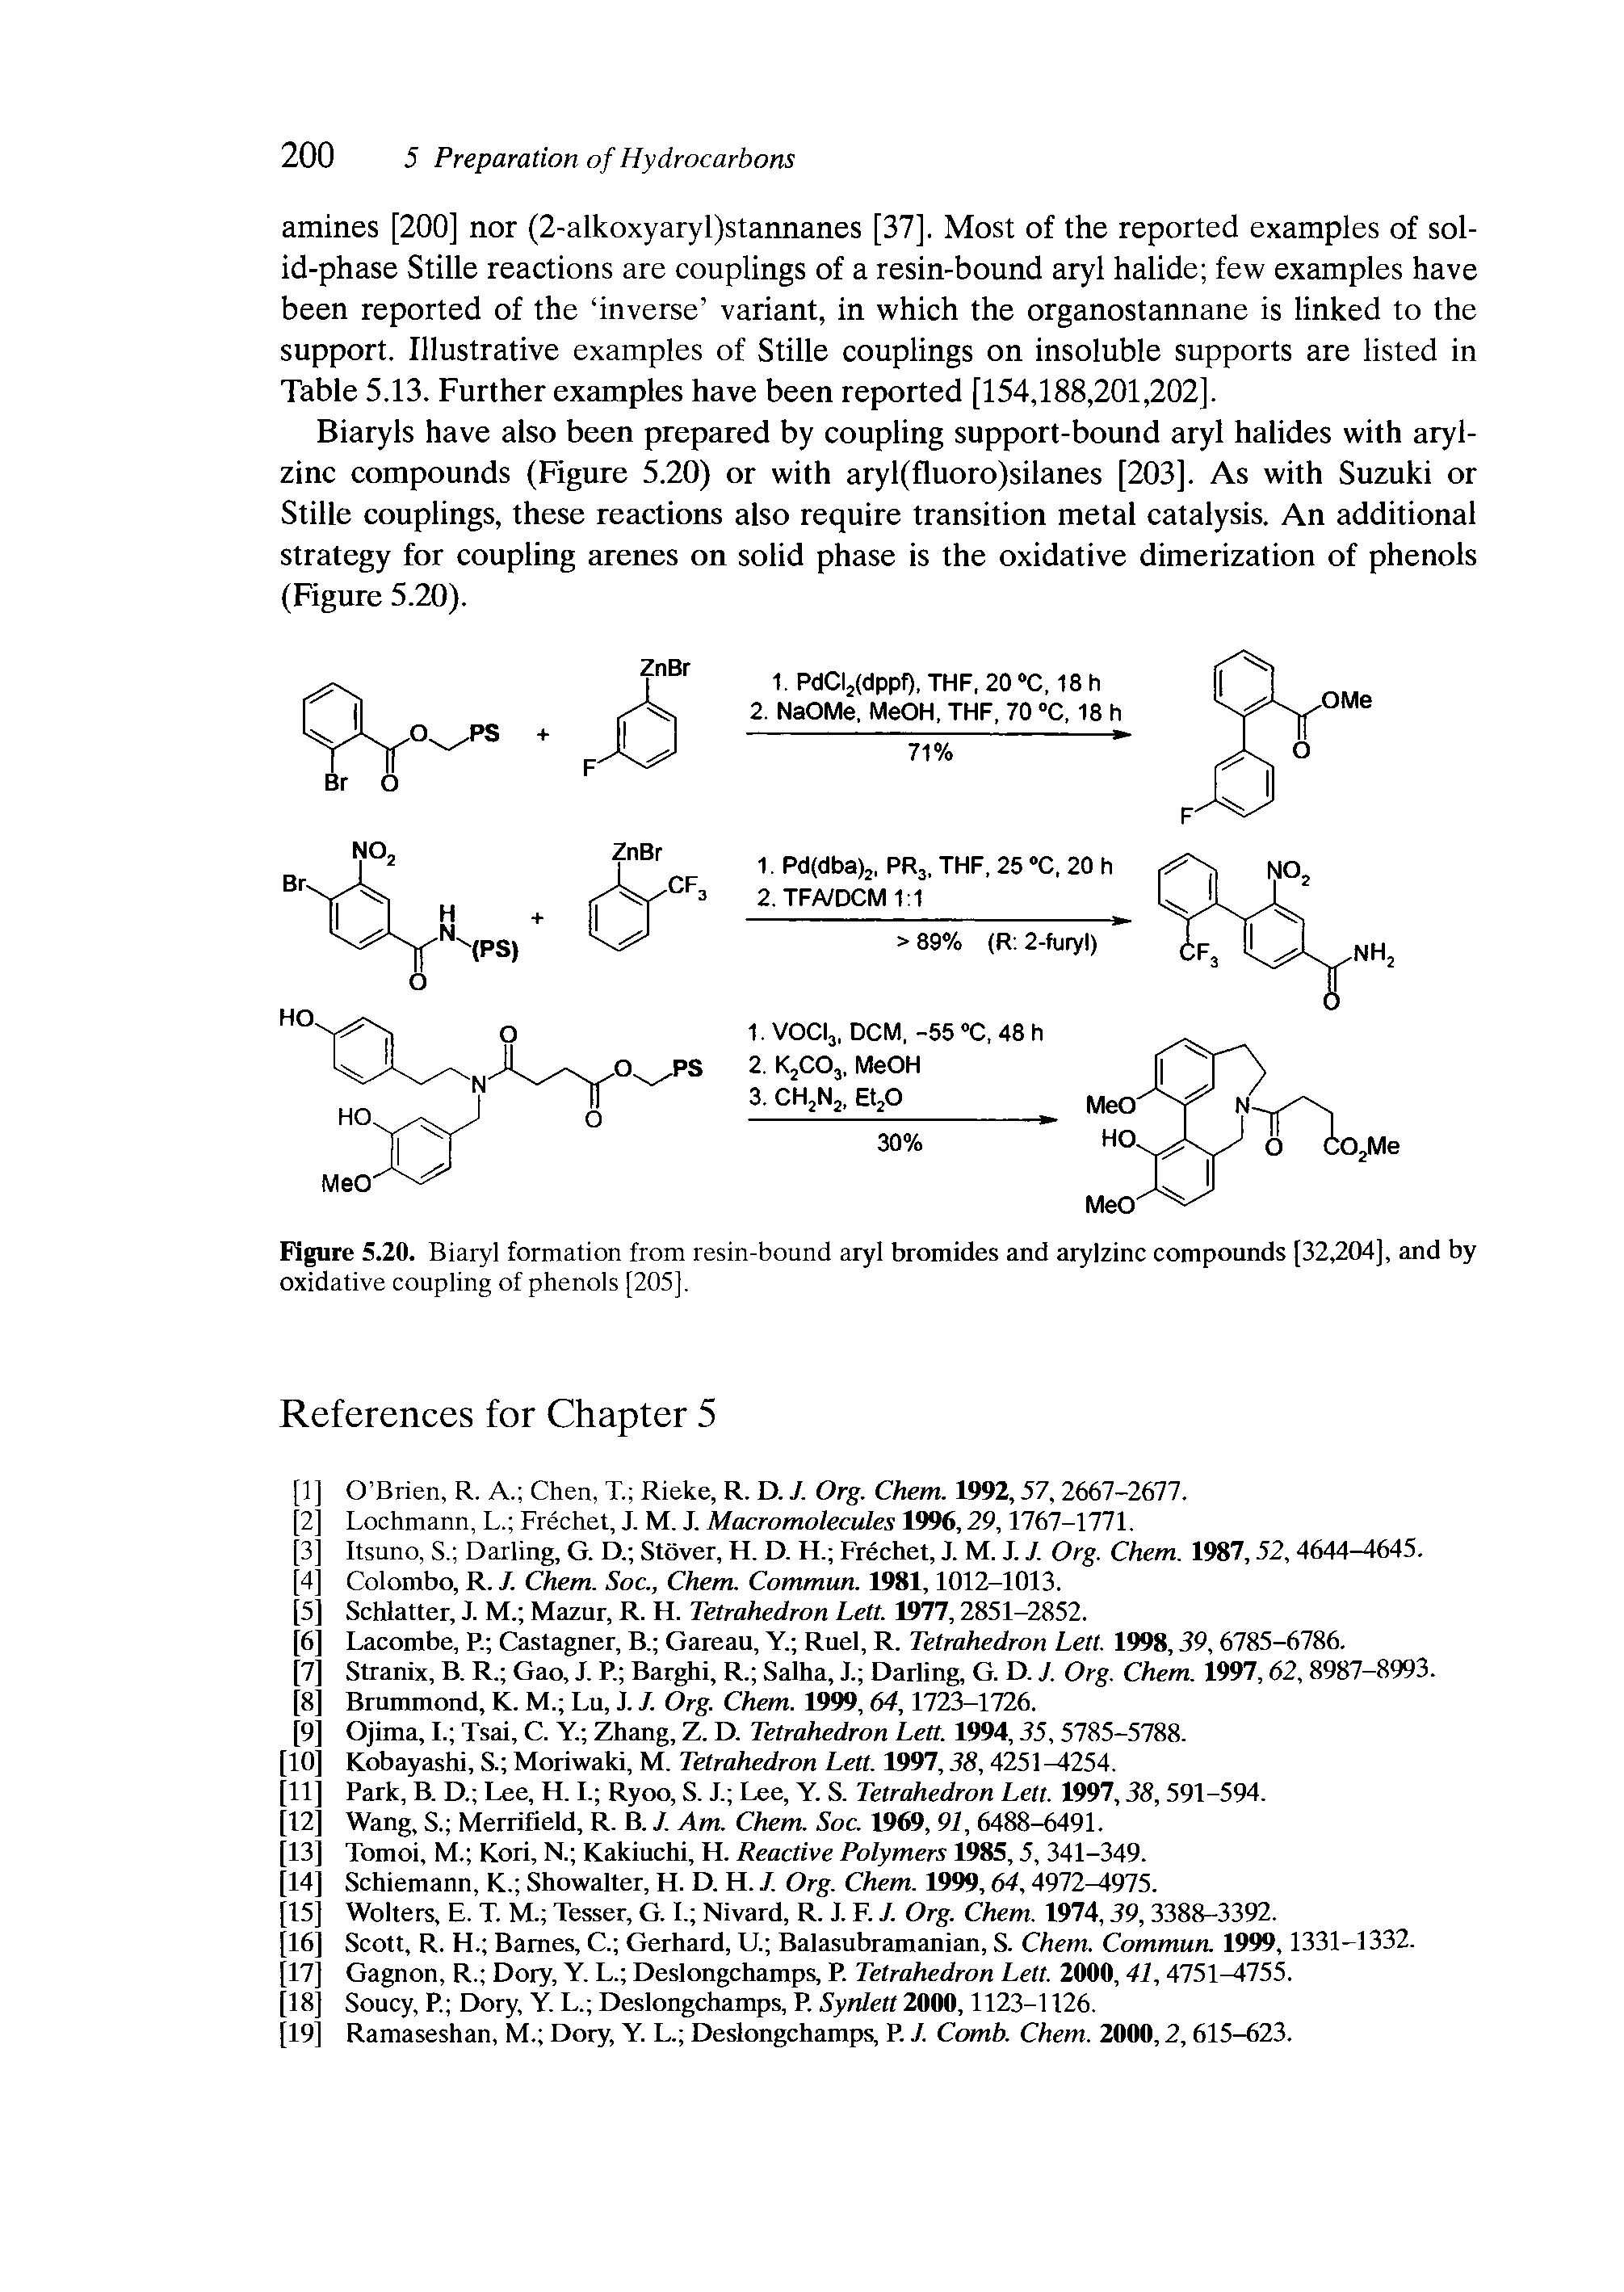 Figure 5.20. Biaryl formation from resin-bound aryl bromides and arylzinc compounds [32,204], and by oxidative coupling of phenols [205],...